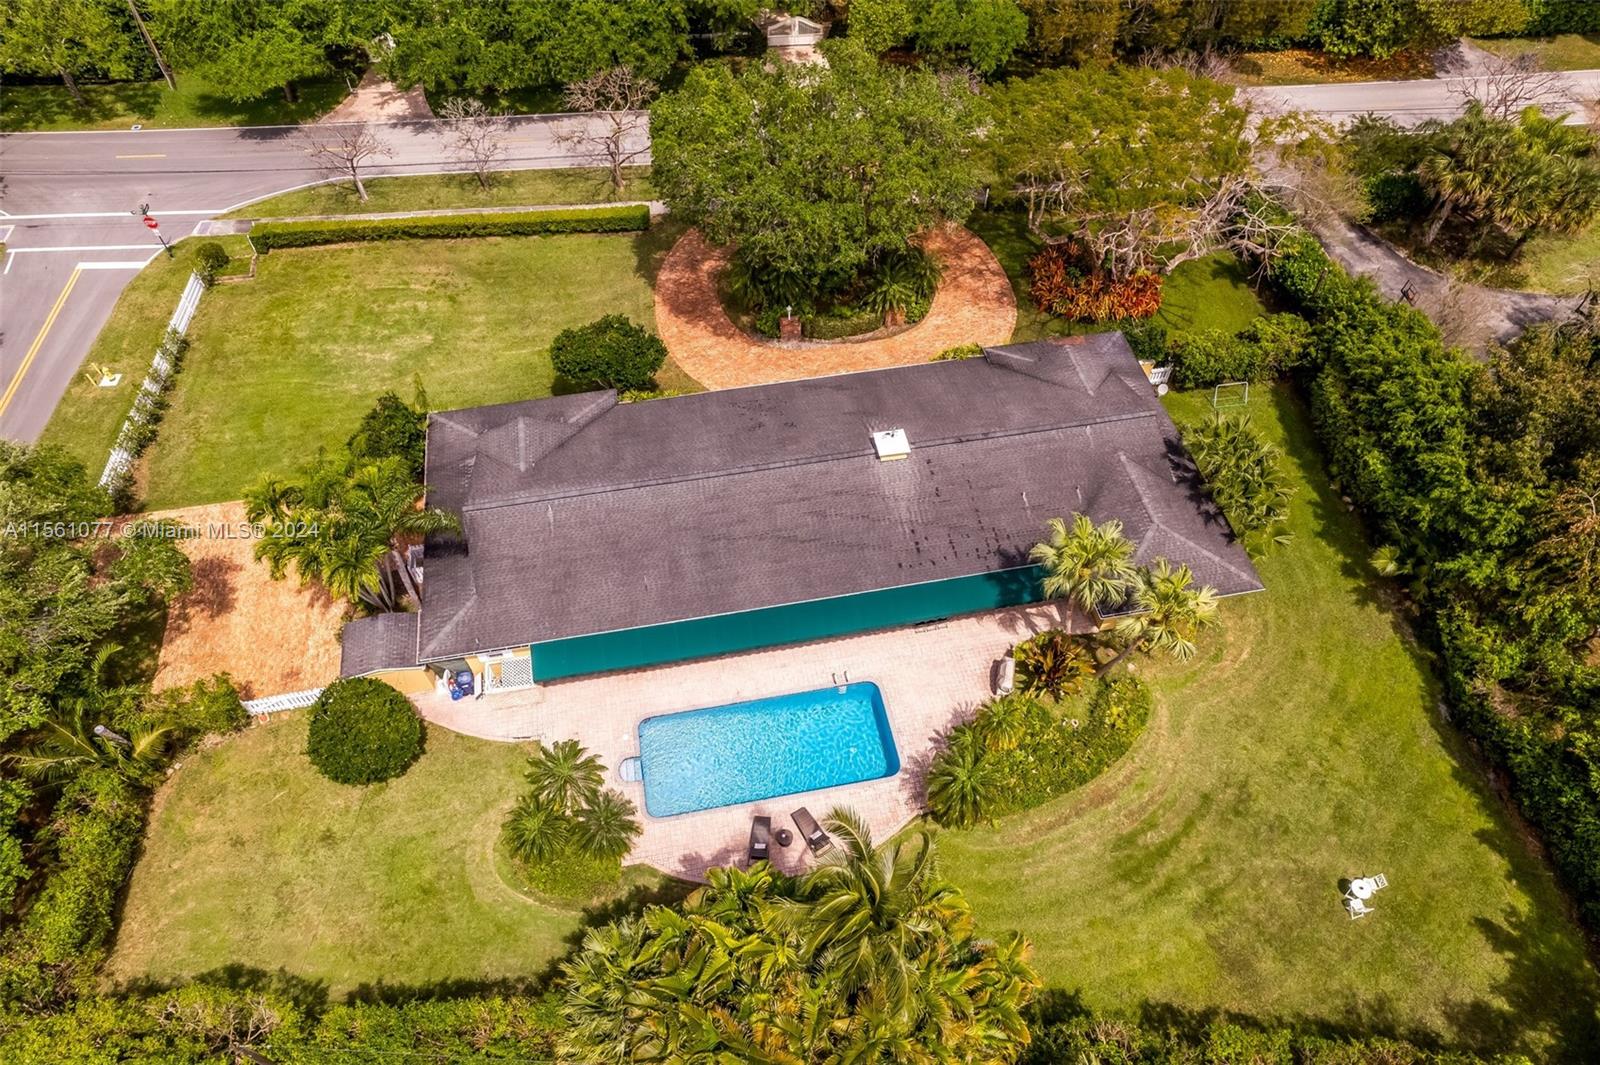 The perfect family home, sitting on an oversized 32,000+ sf. CORNER lot in the heart of Pinecrest. You'll be greeted by an open floor plan that seamlessly connects the family, living, dining, & kitchen areas.  Generous room sizes, expansive views, & access to the backyard/pool area & large covered terrace. Grand-sized living & formal dining room with marble floors. Oversized office or studio with an independent entrance & Chicago brick driveway. Chef's kitchen with large breakfast area. New A/C in 2023. Impact doors and windows bring abundant natural light in. Rainsoft reverse osmosis water filter for the entire home. Ample storage throughout the house and a spacious storage shed. Ideal location, close to Pinecrest and Palmetto Bay's best Schools.